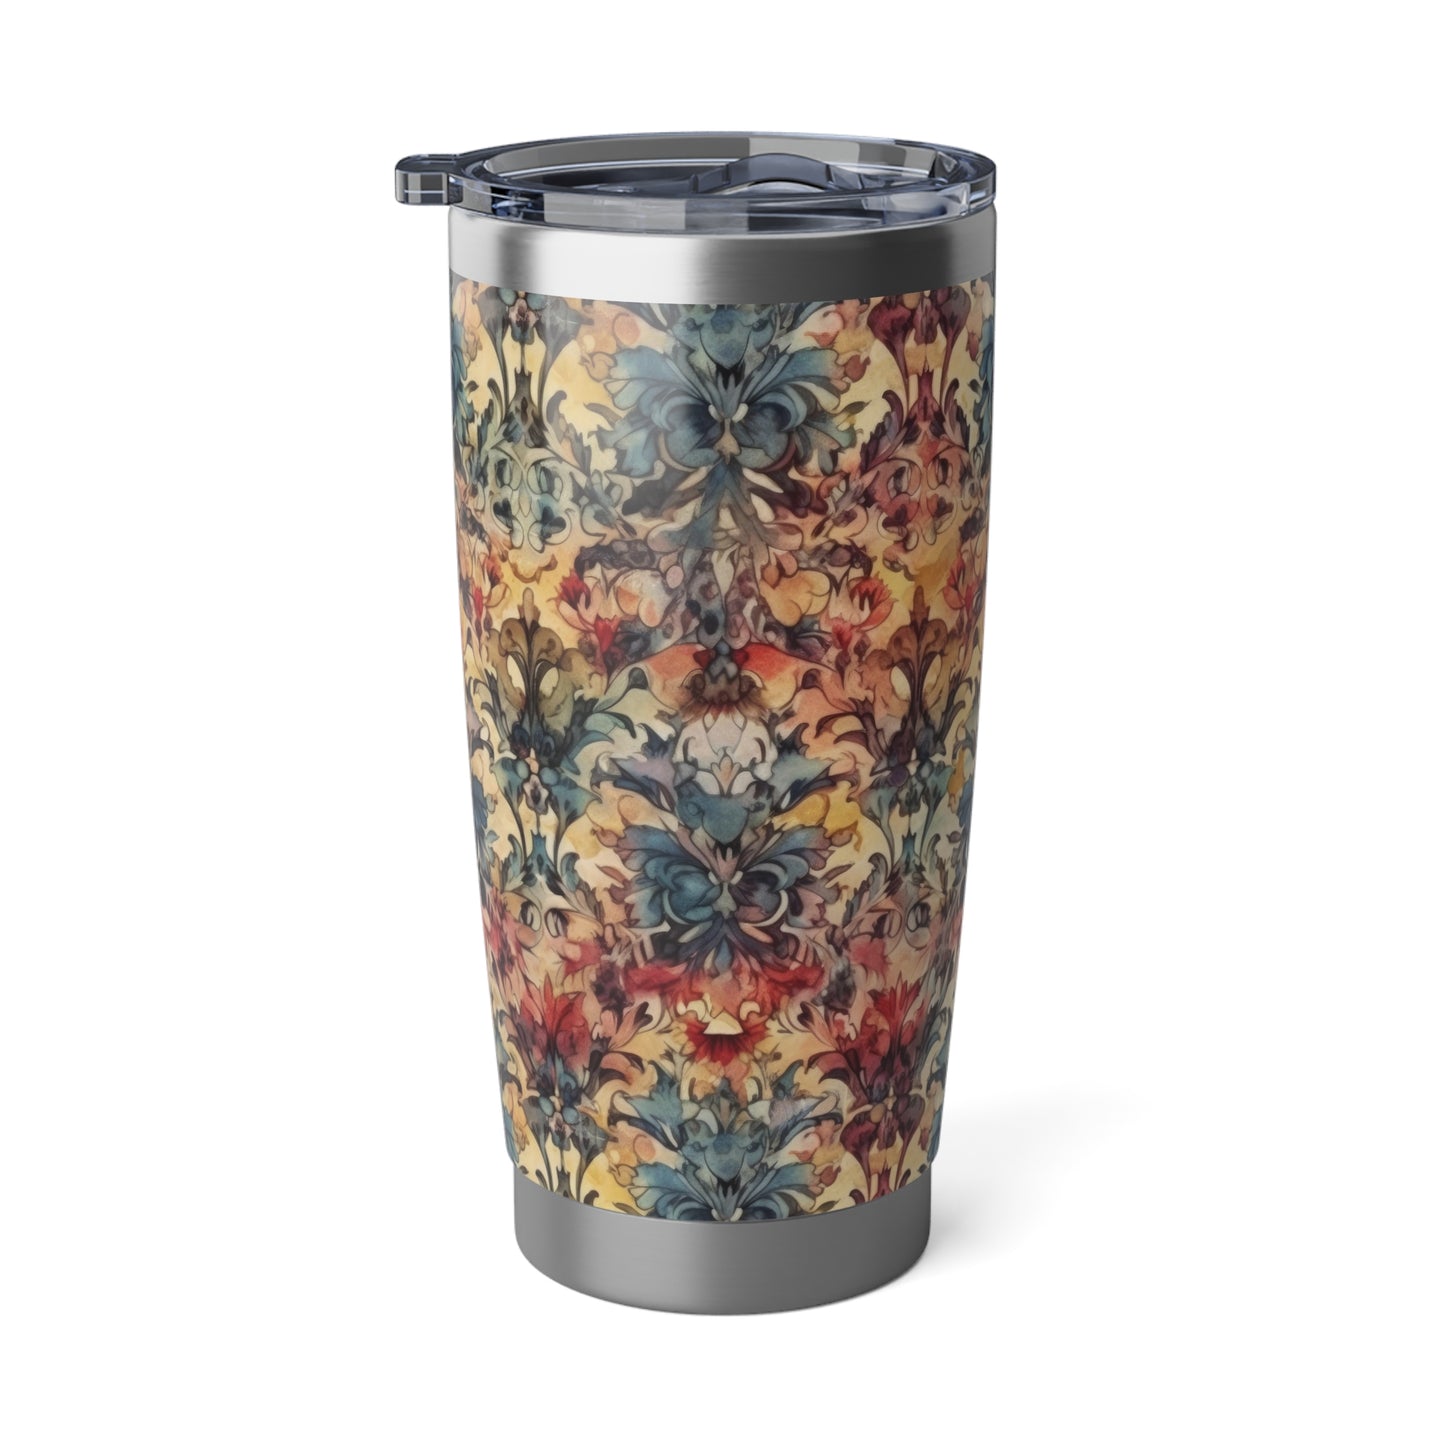 Tapestry Designs 1.2 - Vagabond 20oz Tumbler - Stainless Steel - Double Wall